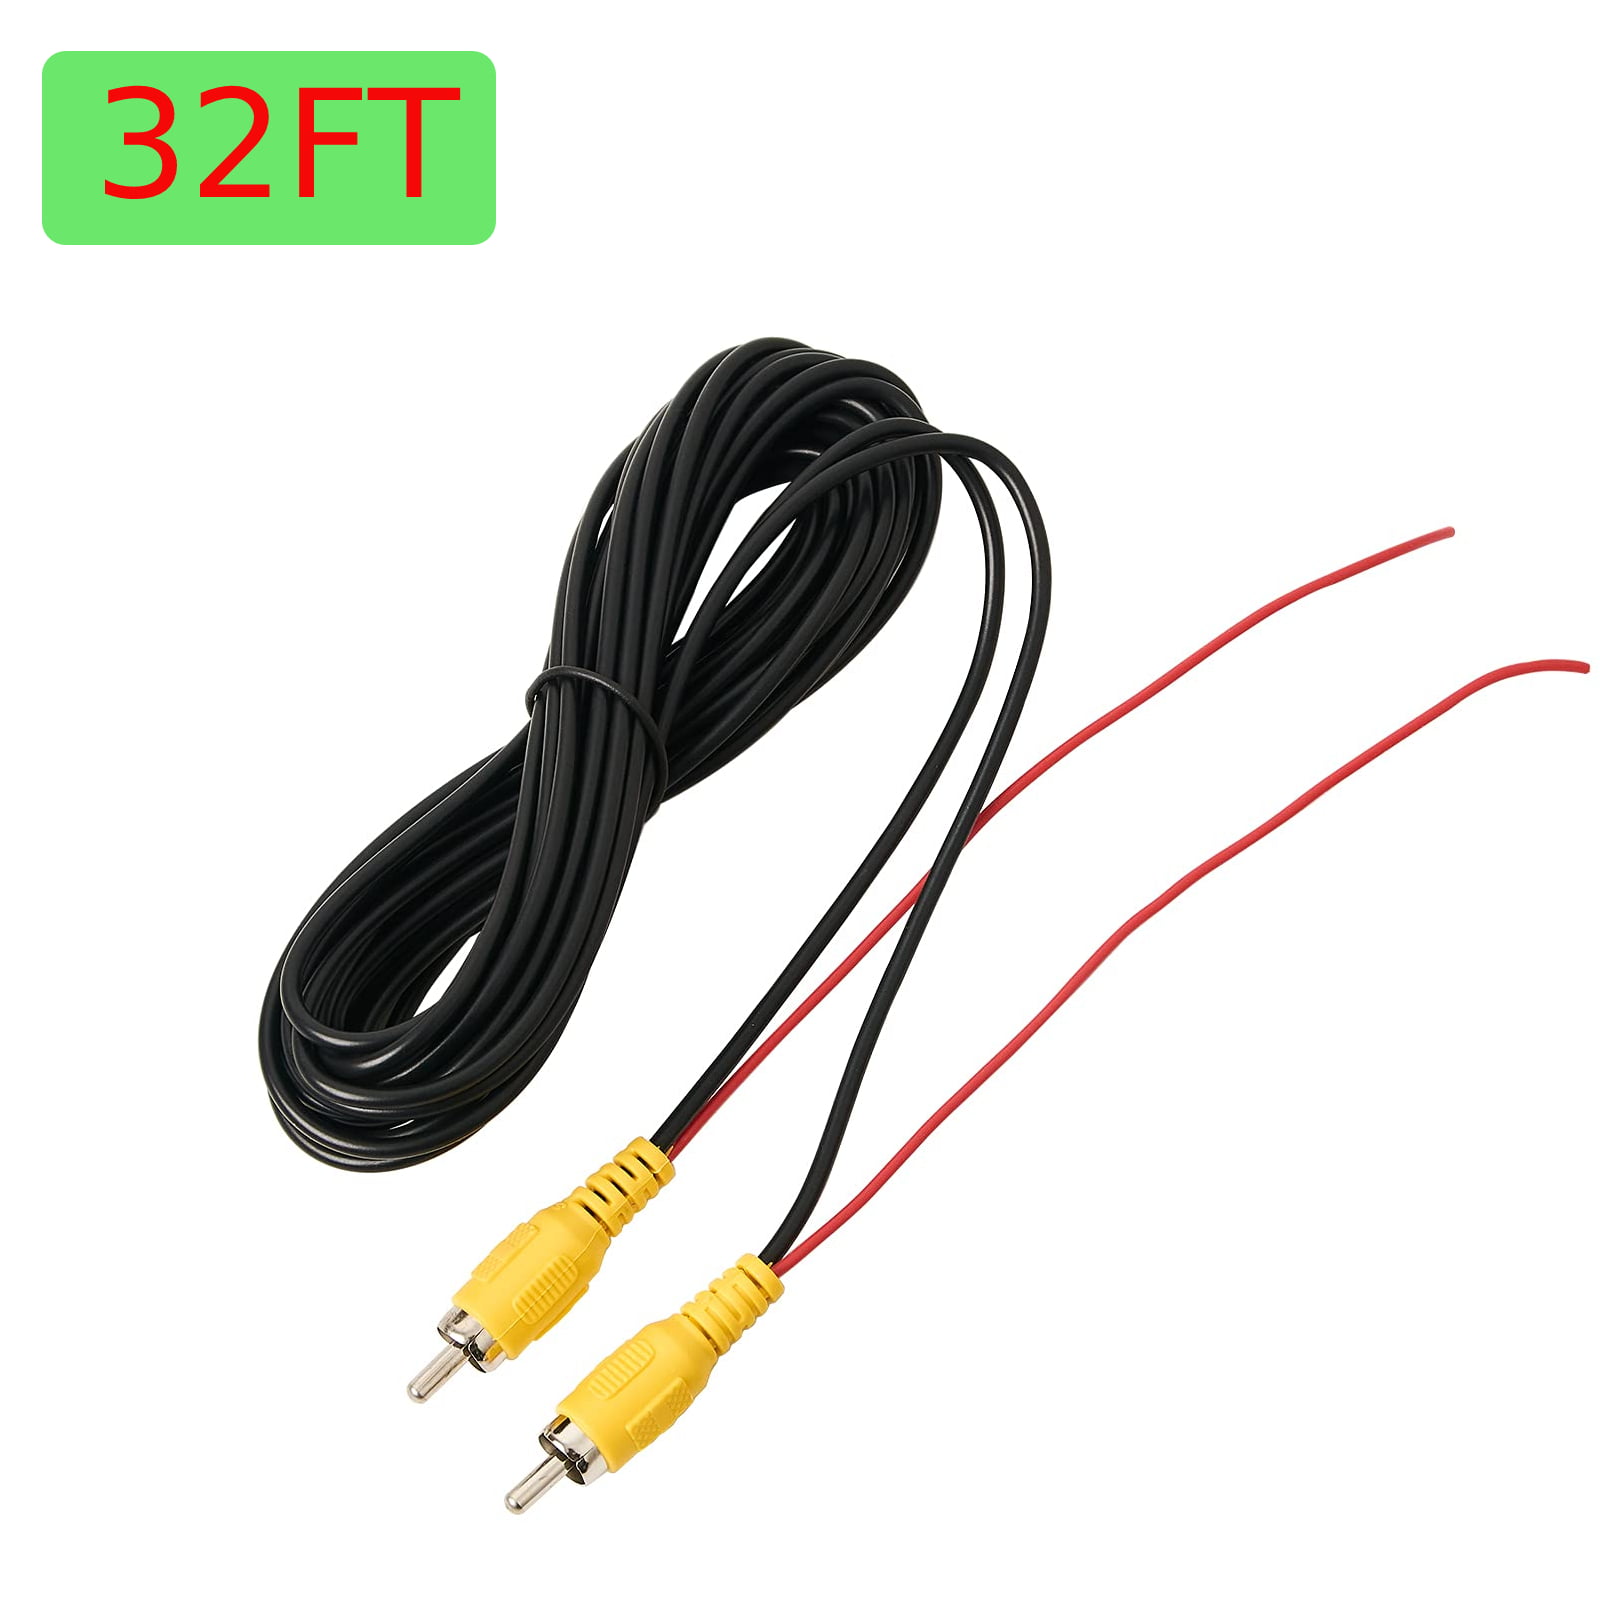 Reverse Wire Car Backup Parking Kit Hot 10m/32ft Video Extension Cable Lead 